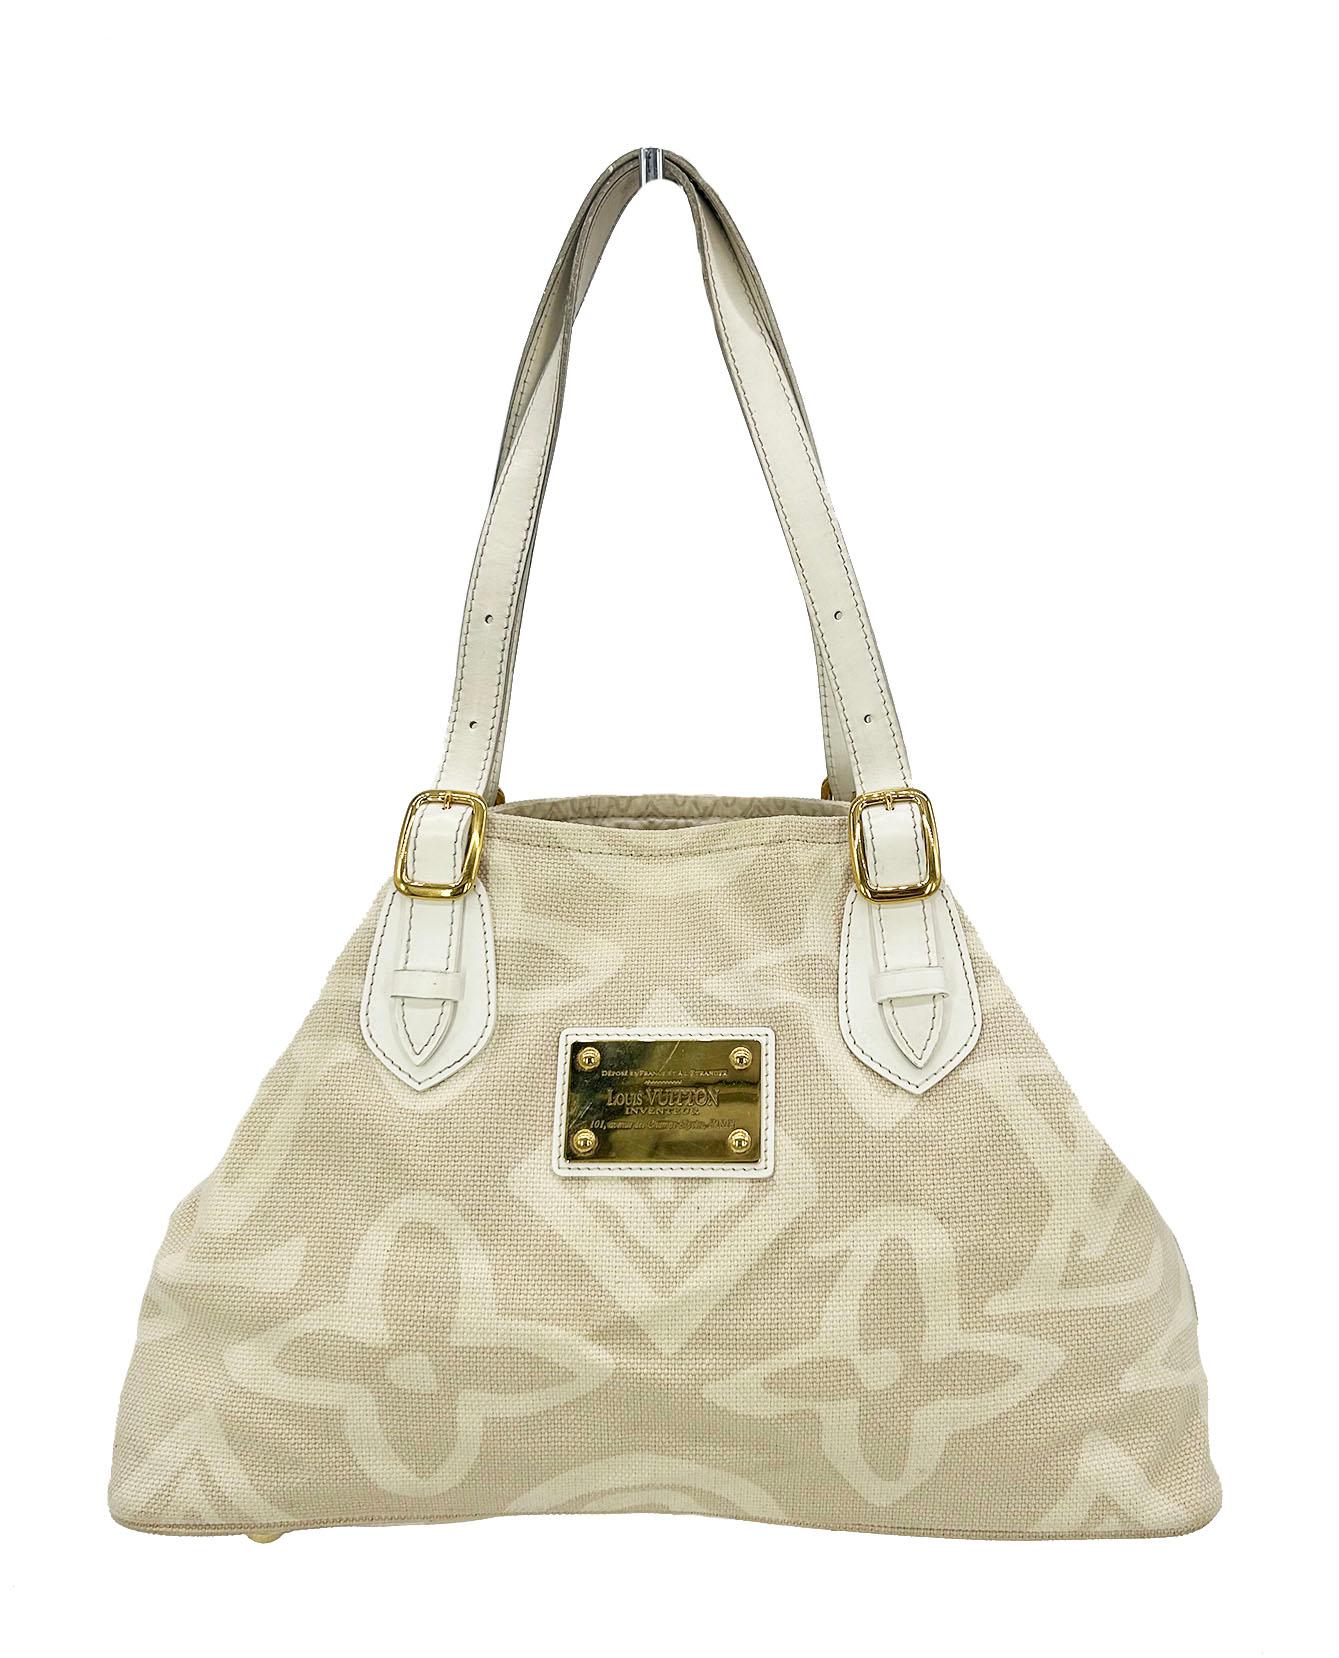 Louis Vuitton Tahitienne Cabas Bag Limited Edition in good condition. Beige and cream printed woven canvas exterior trimmed with white leather and gold hardware. Engraved name plate on front exterior side reads 